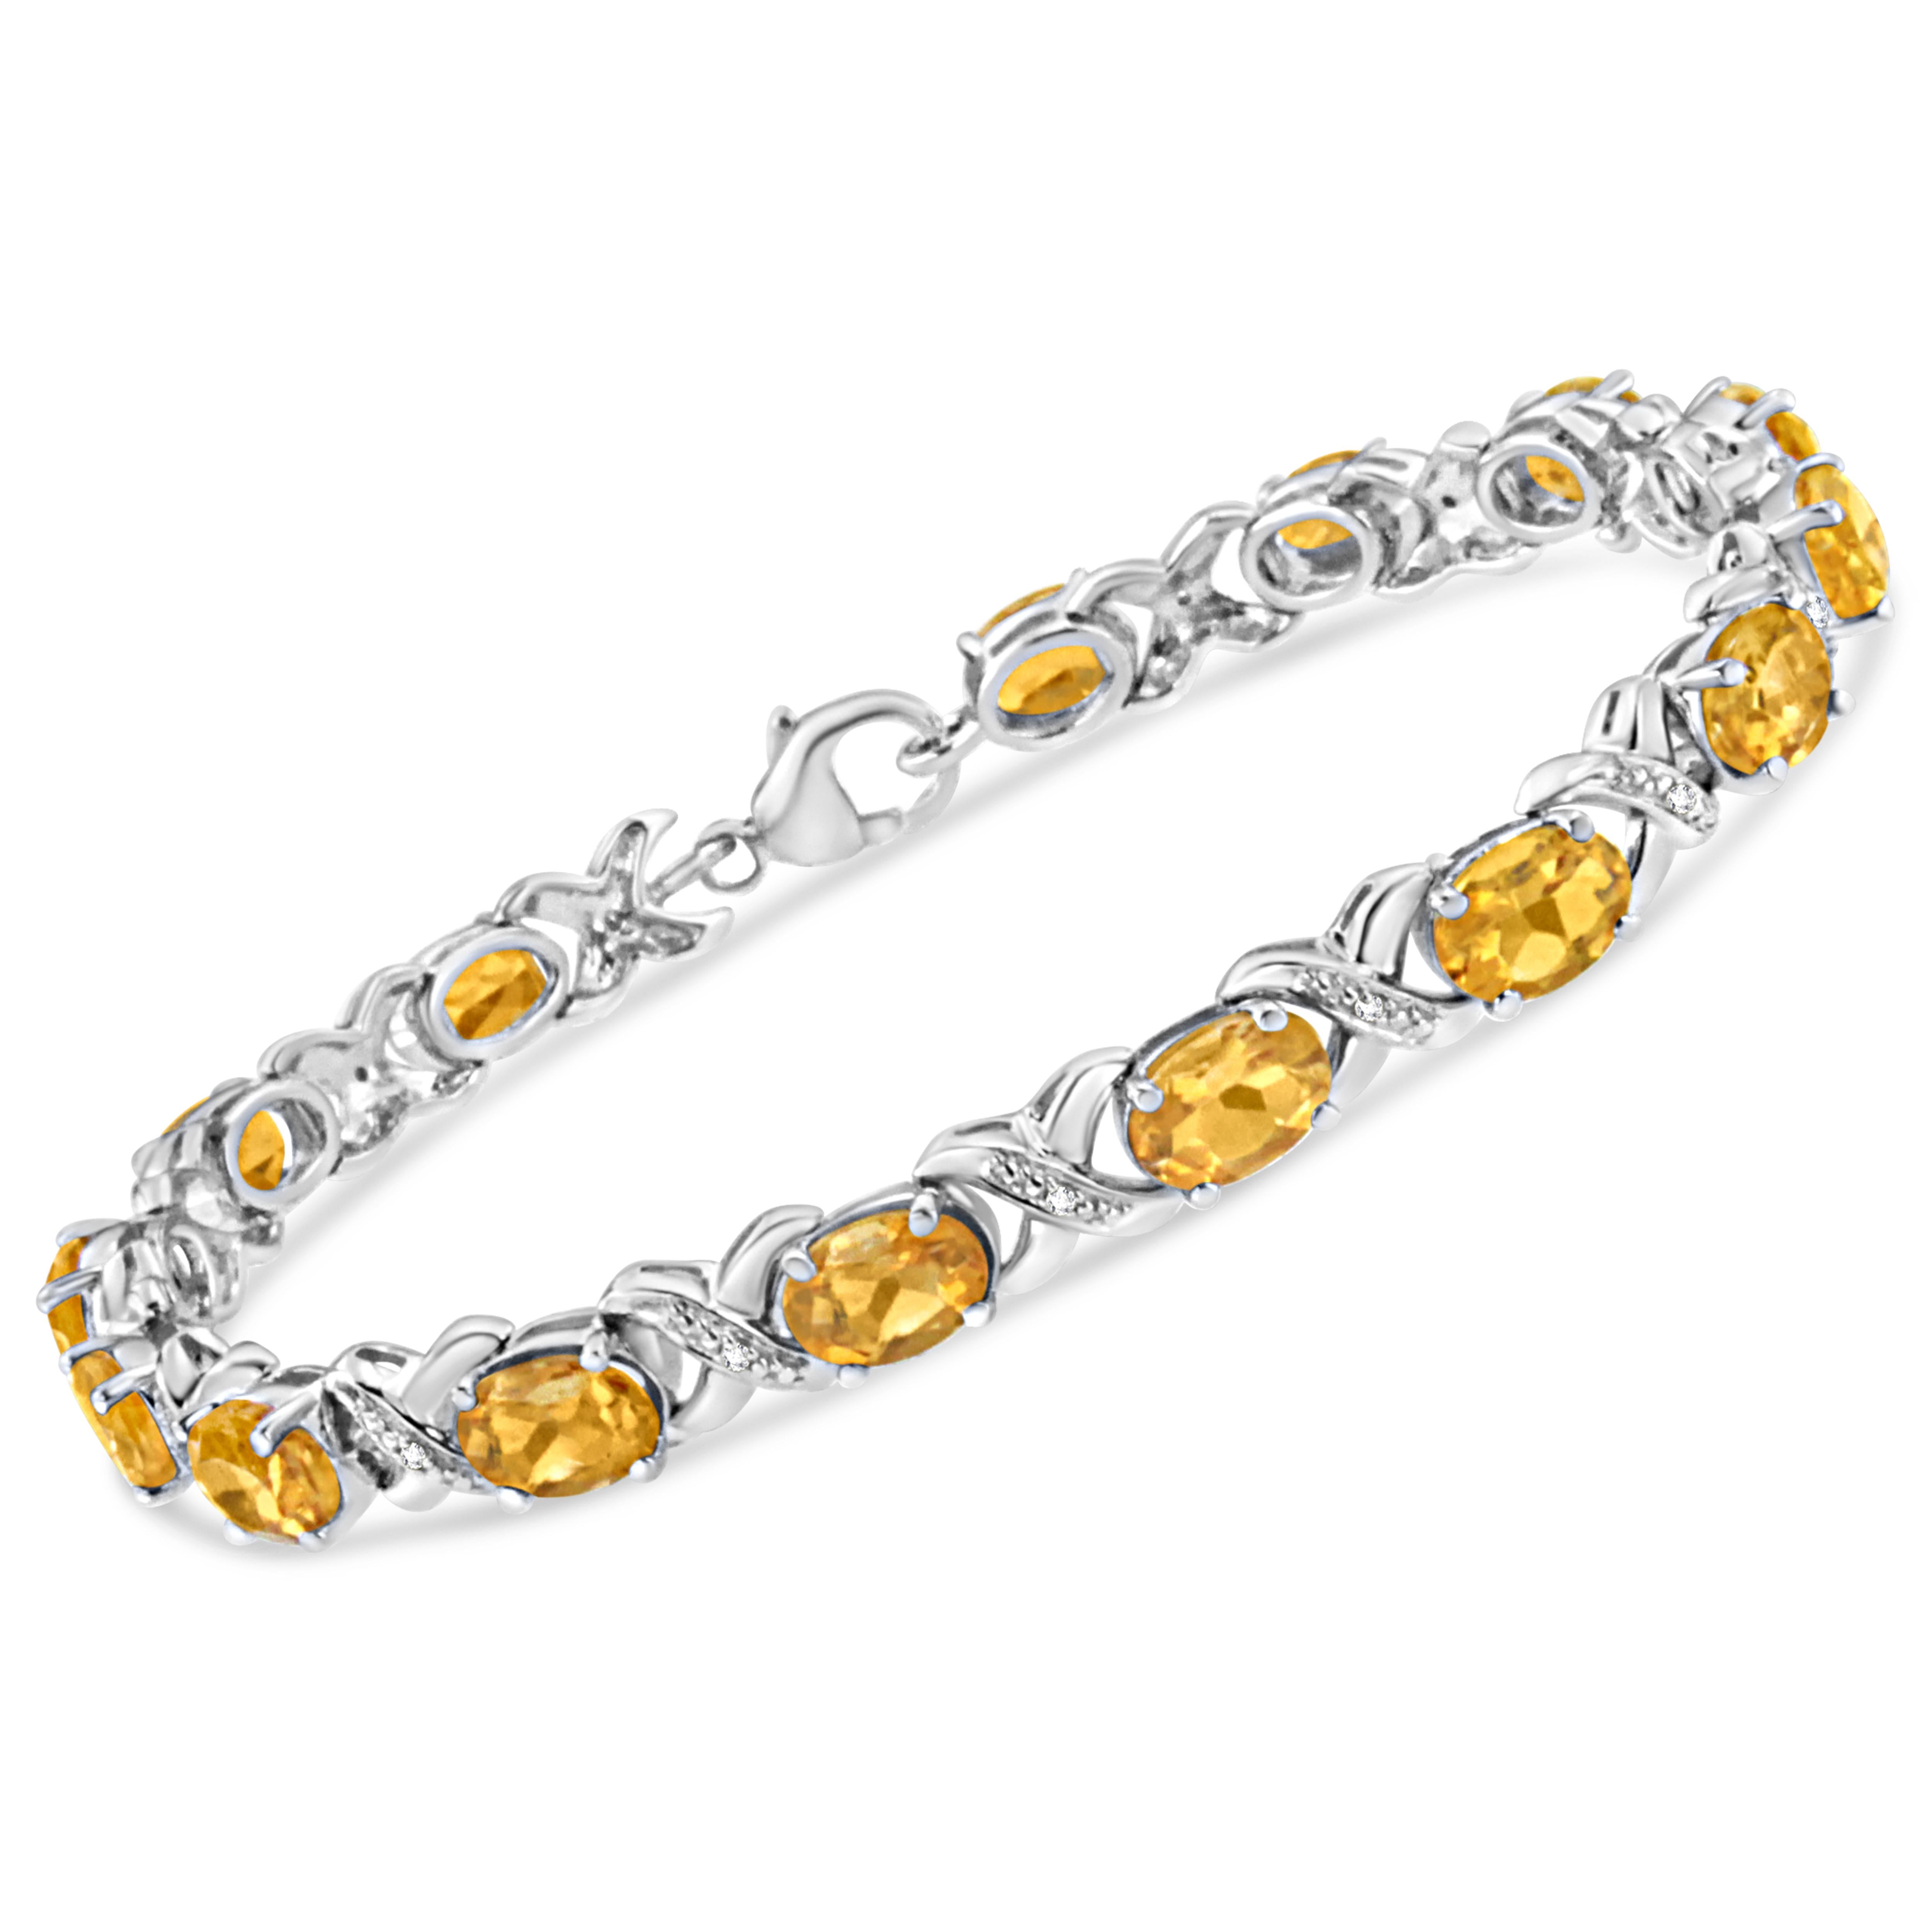 Make a style statement with this resplendent citrine and diamond tennis bracelet. Styled in remarkable sterling silver this bracelet is embellished with 15 alluring prong set oval cut citrine accentuated by 15 brilliant round cut diamonds in prong